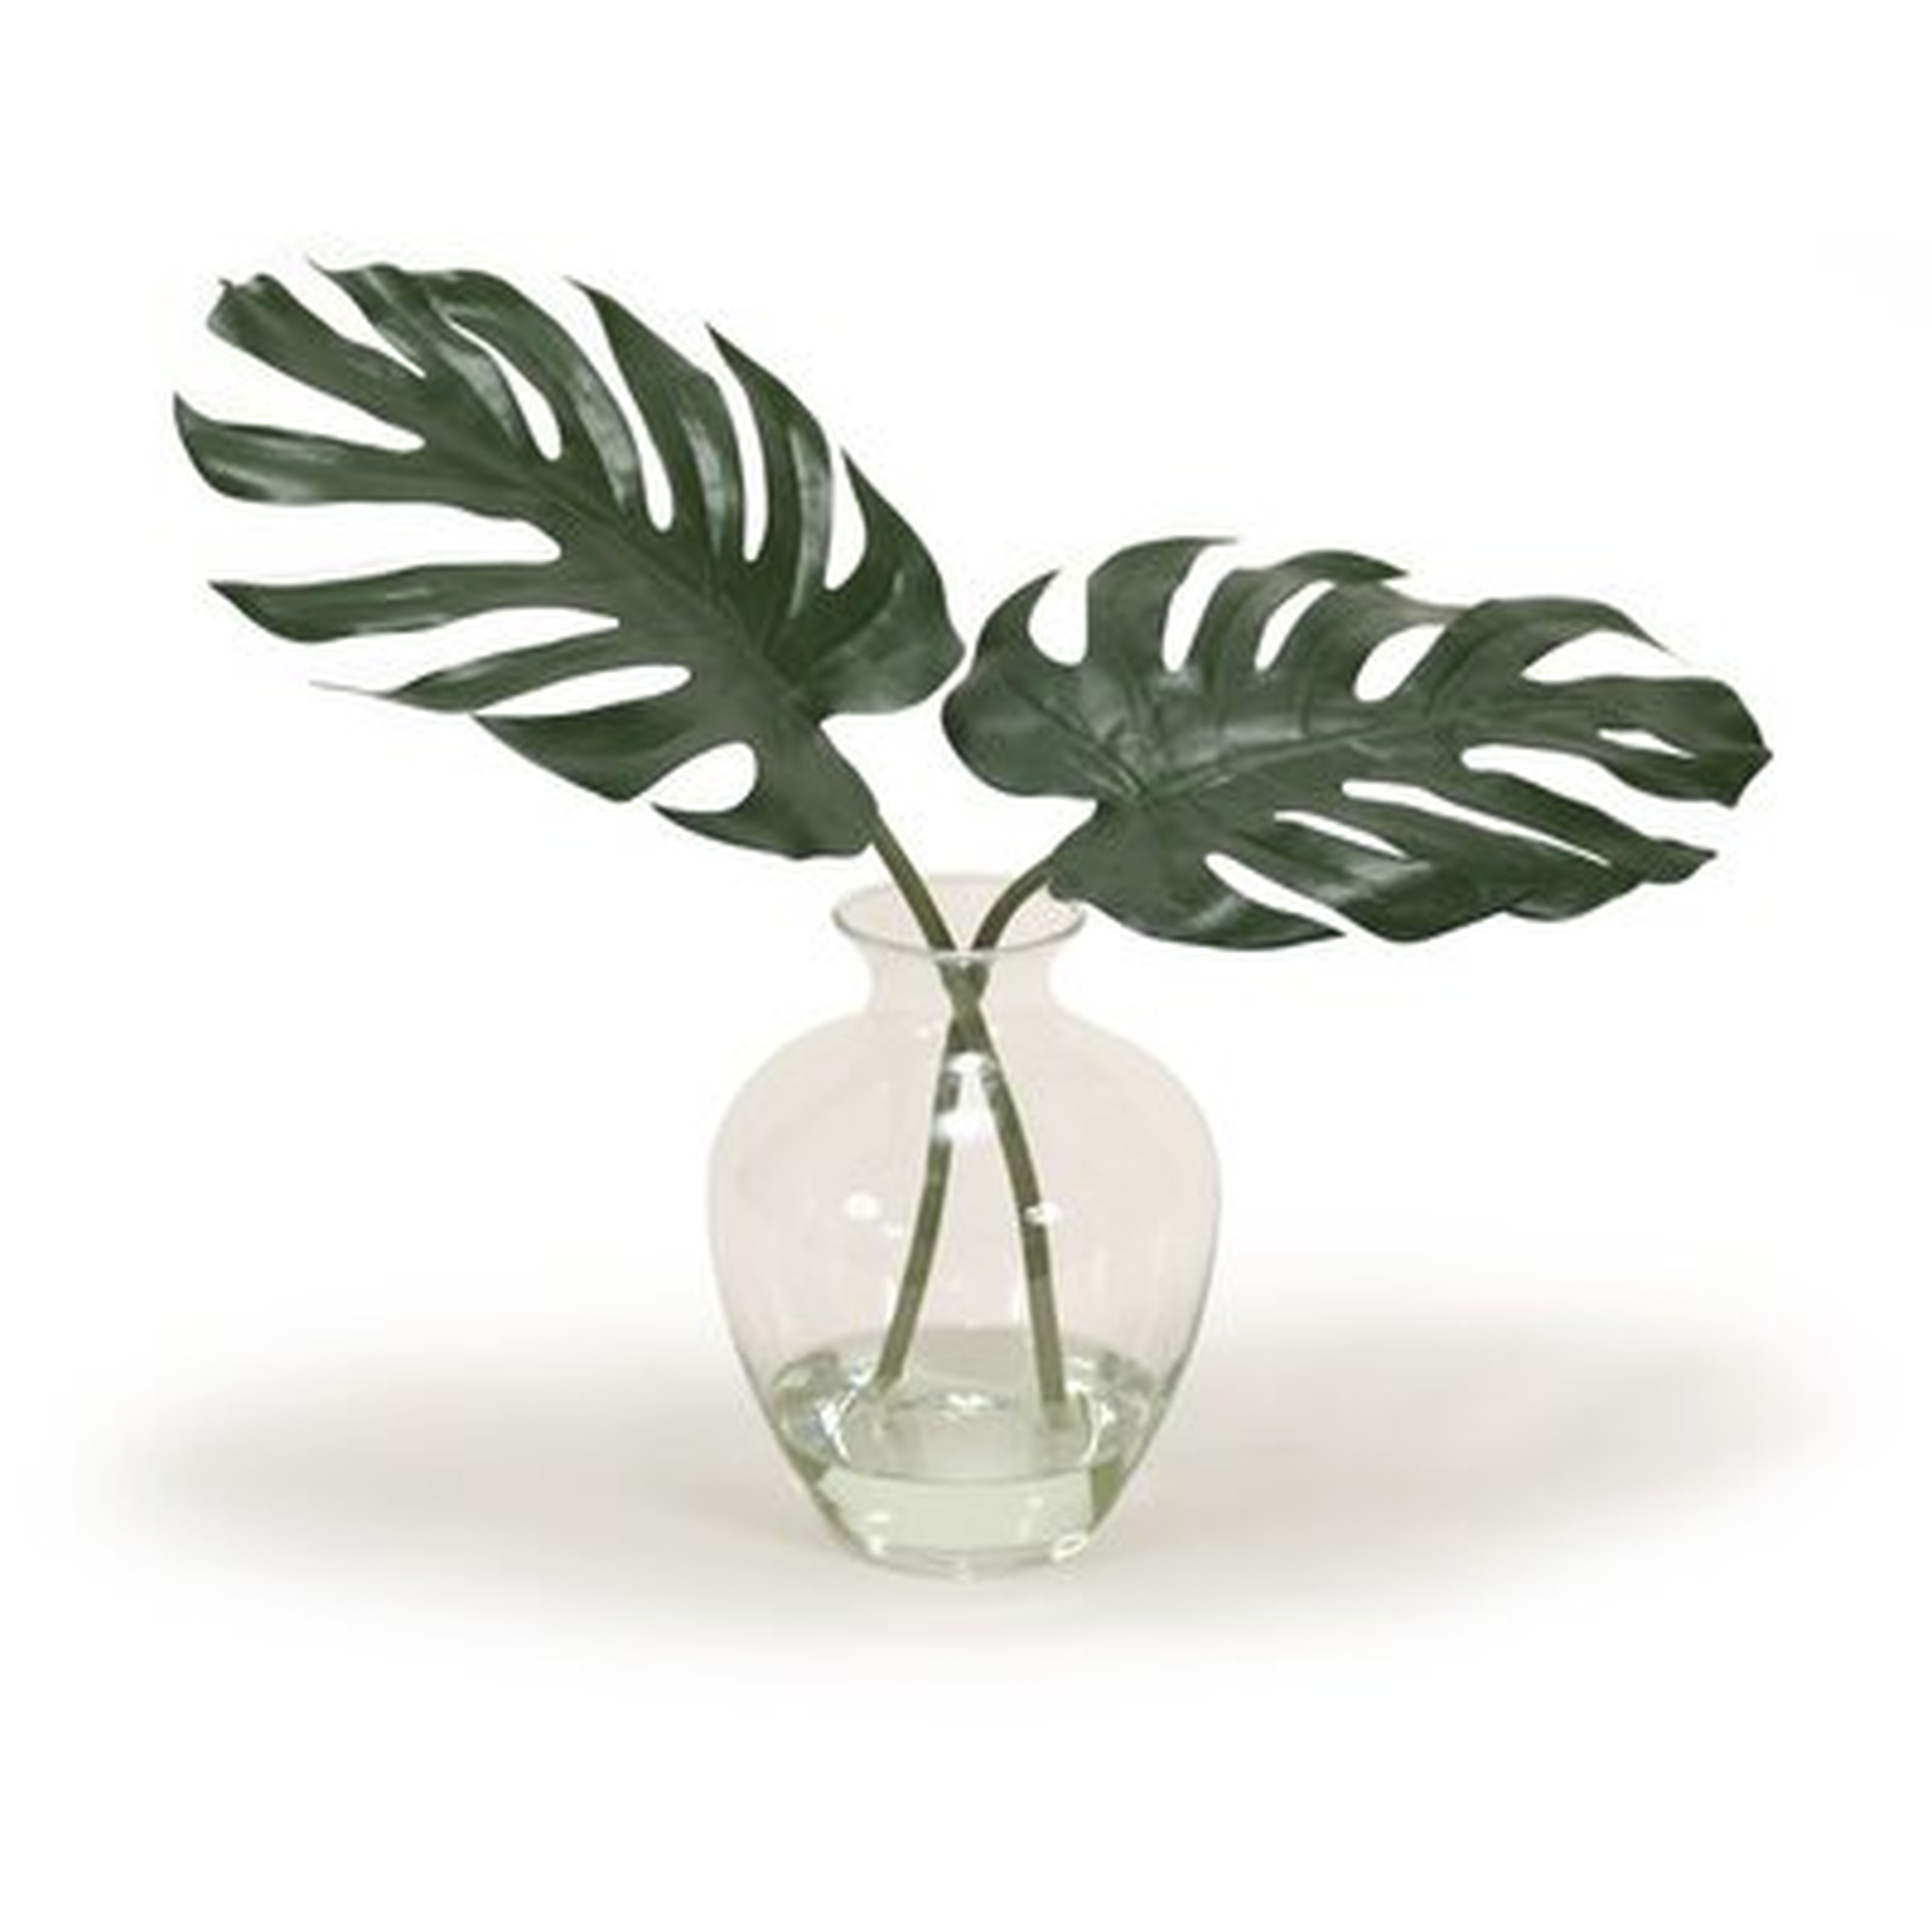 10" Artificial Philodendron Plant in Pot - Wayfair